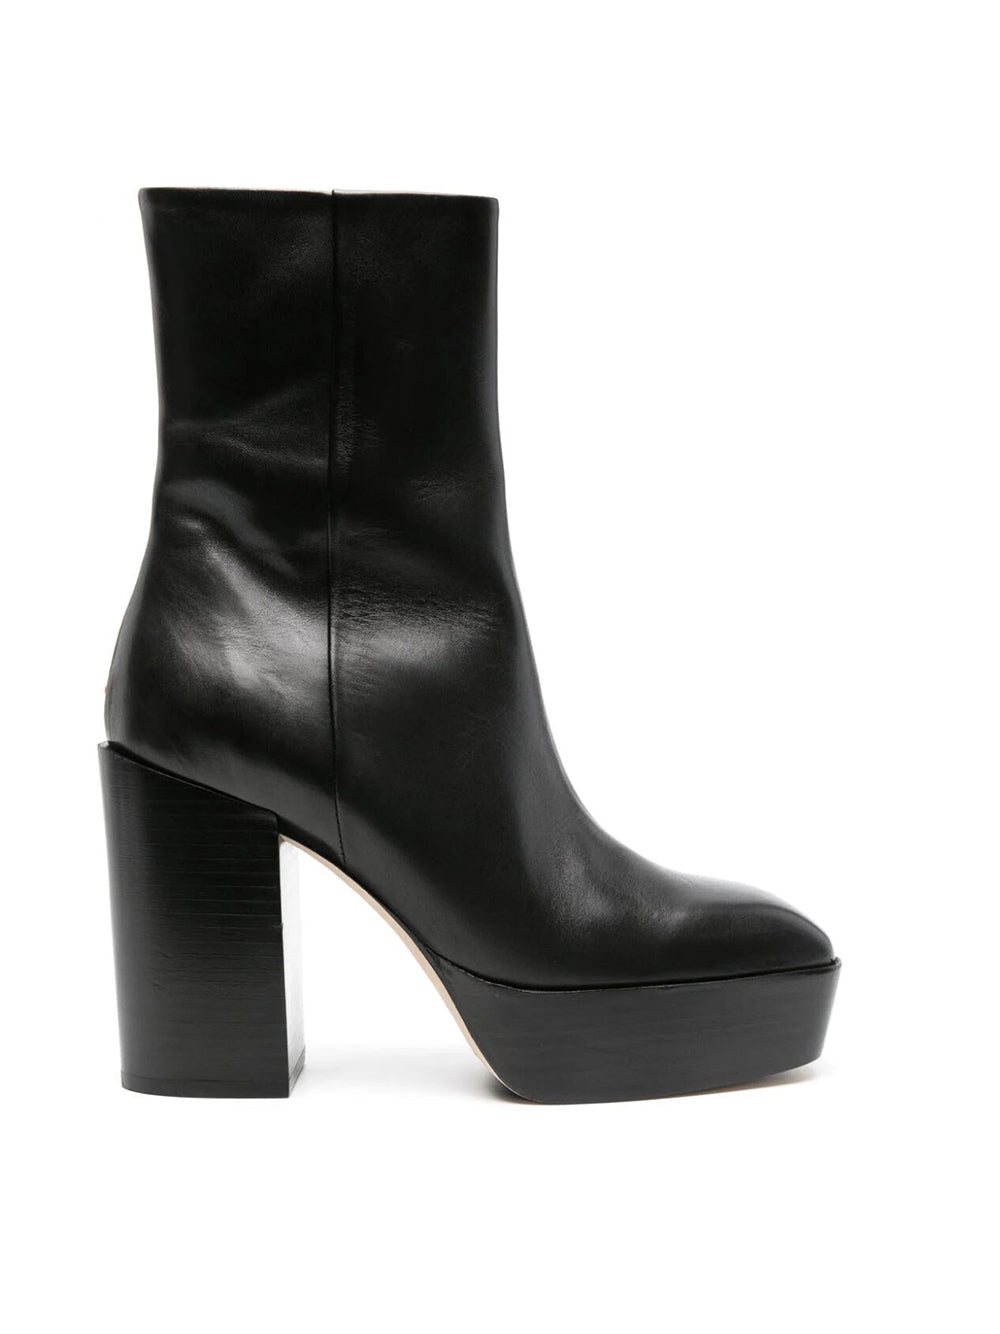 Berlin Ankle Boots